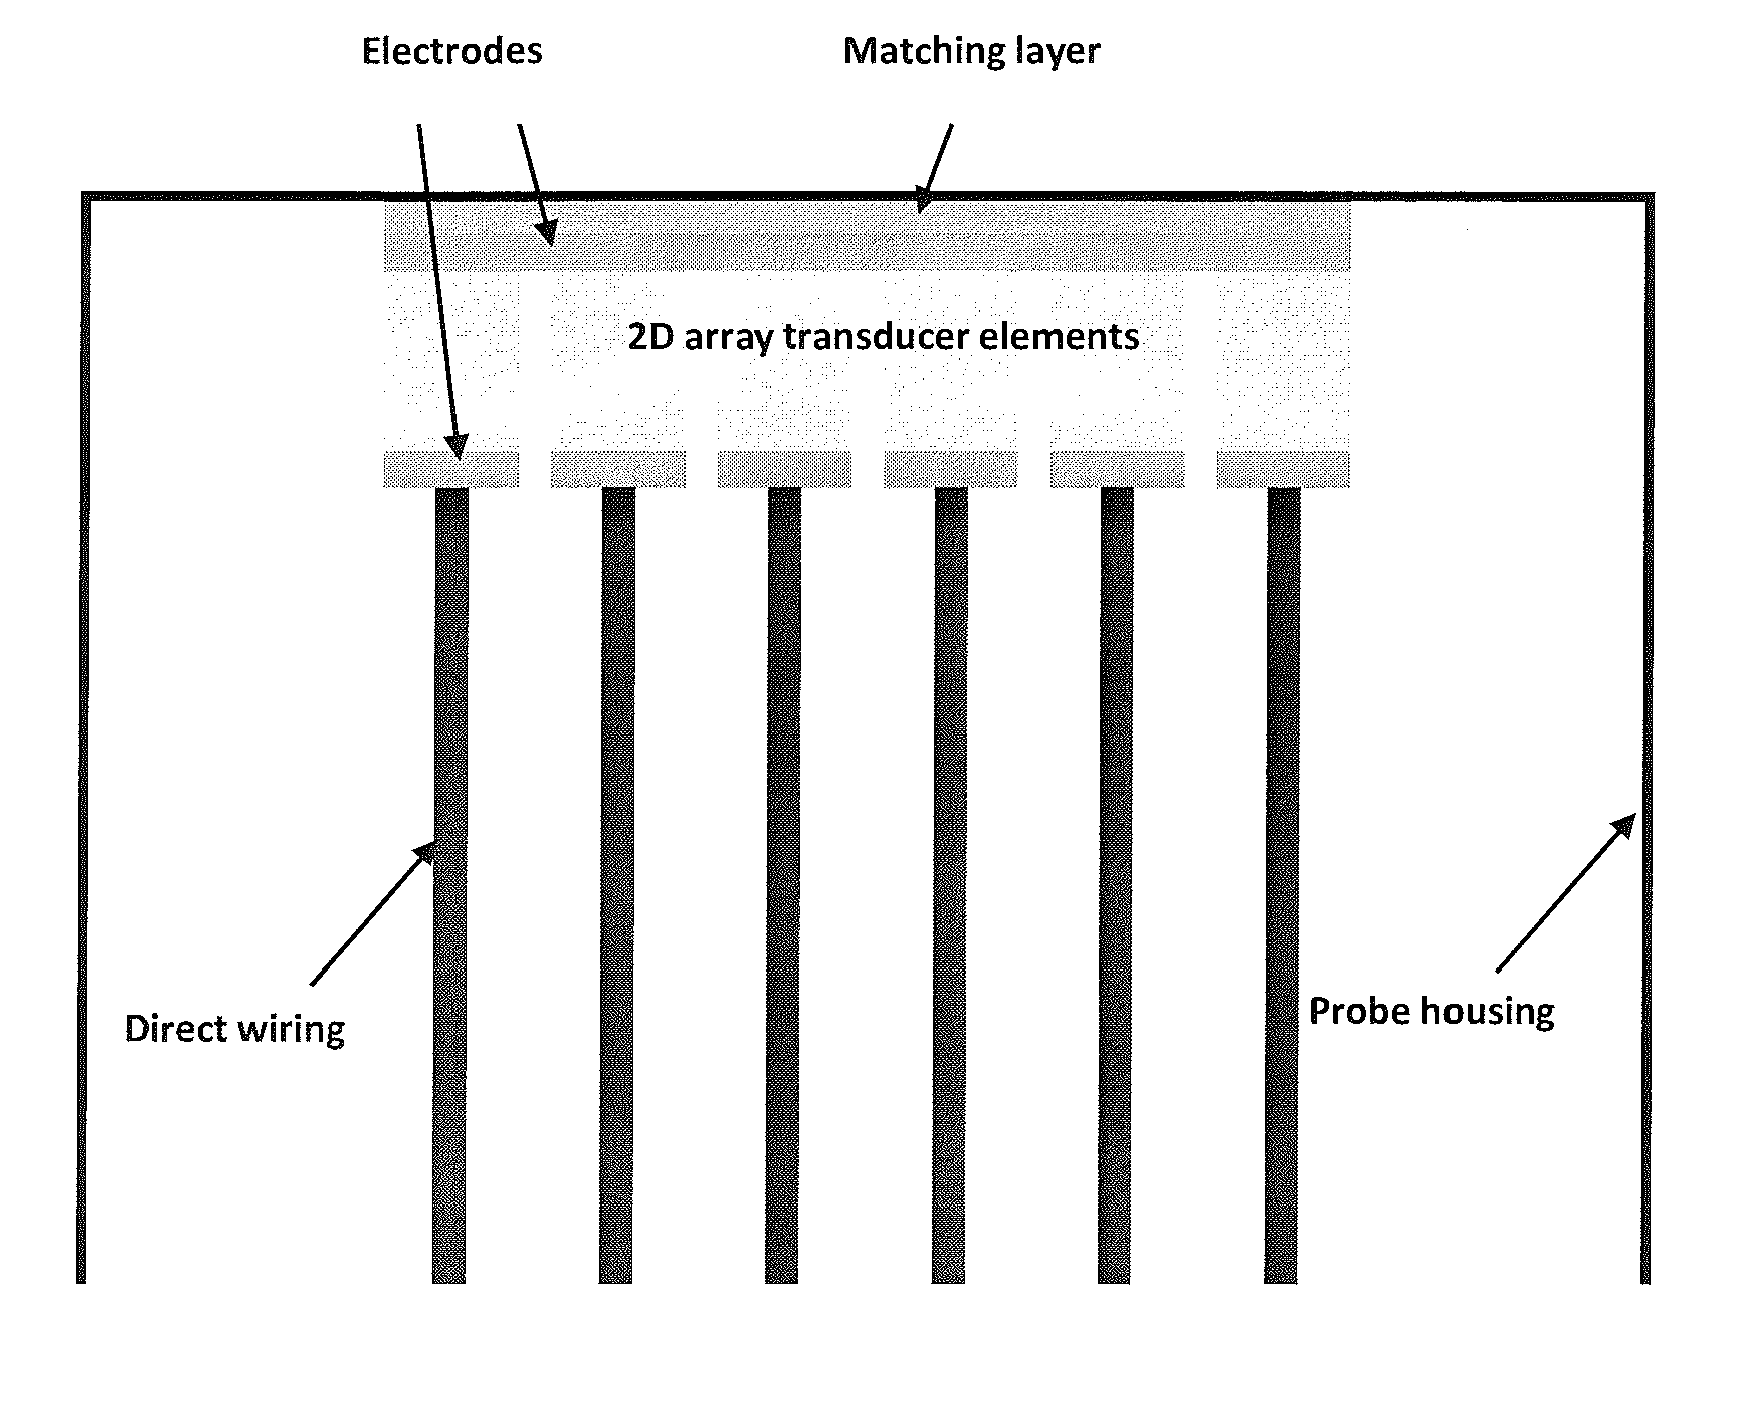 Methods for forming a connection with a micromachined ultrasonic transducer, and associated apparatuses